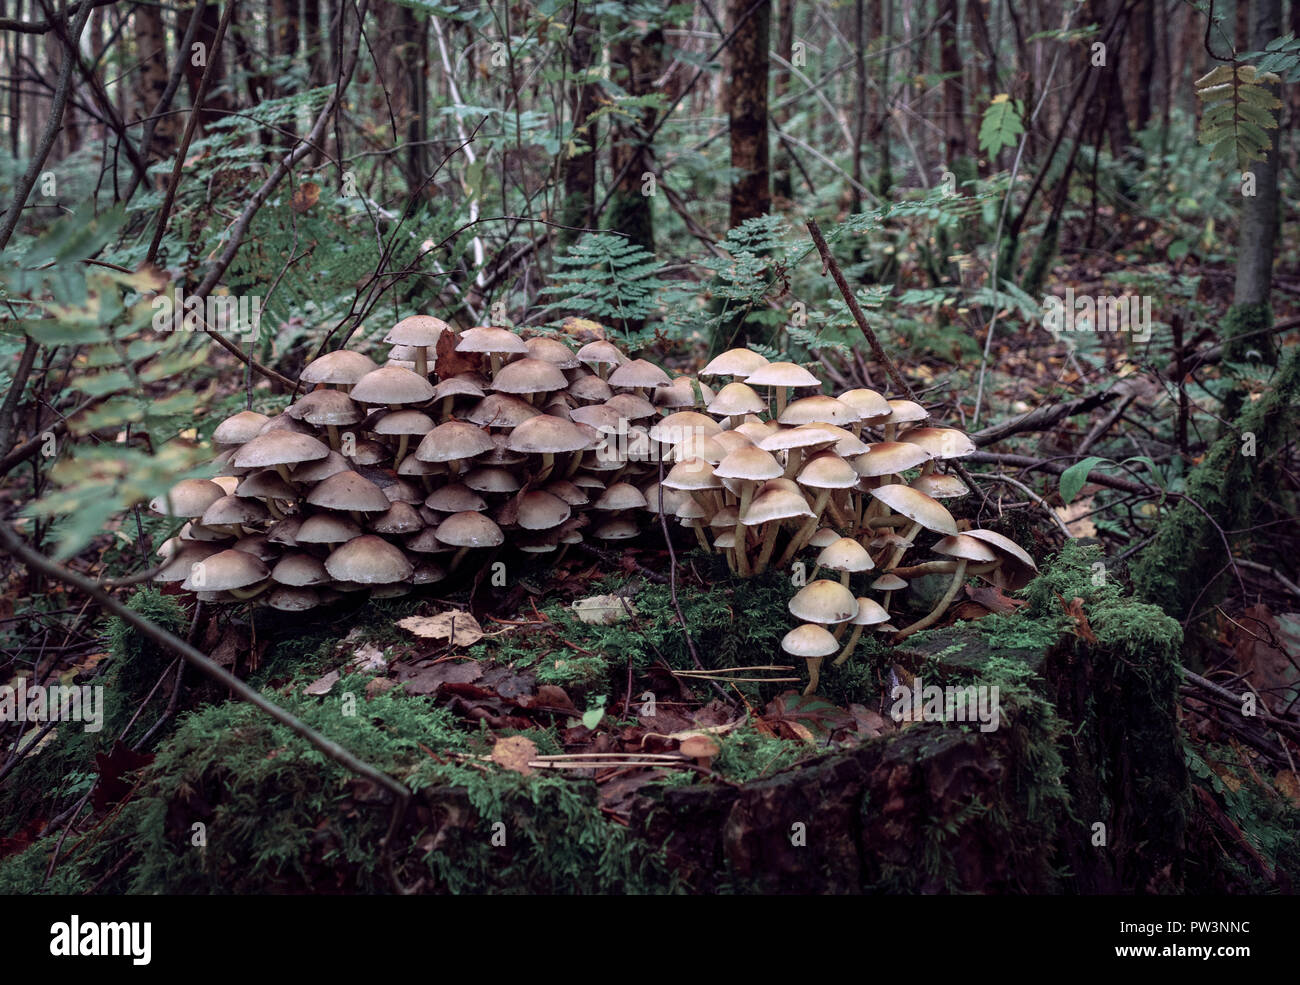 A cluster of wild toadstools on tree trunk Stock Photo